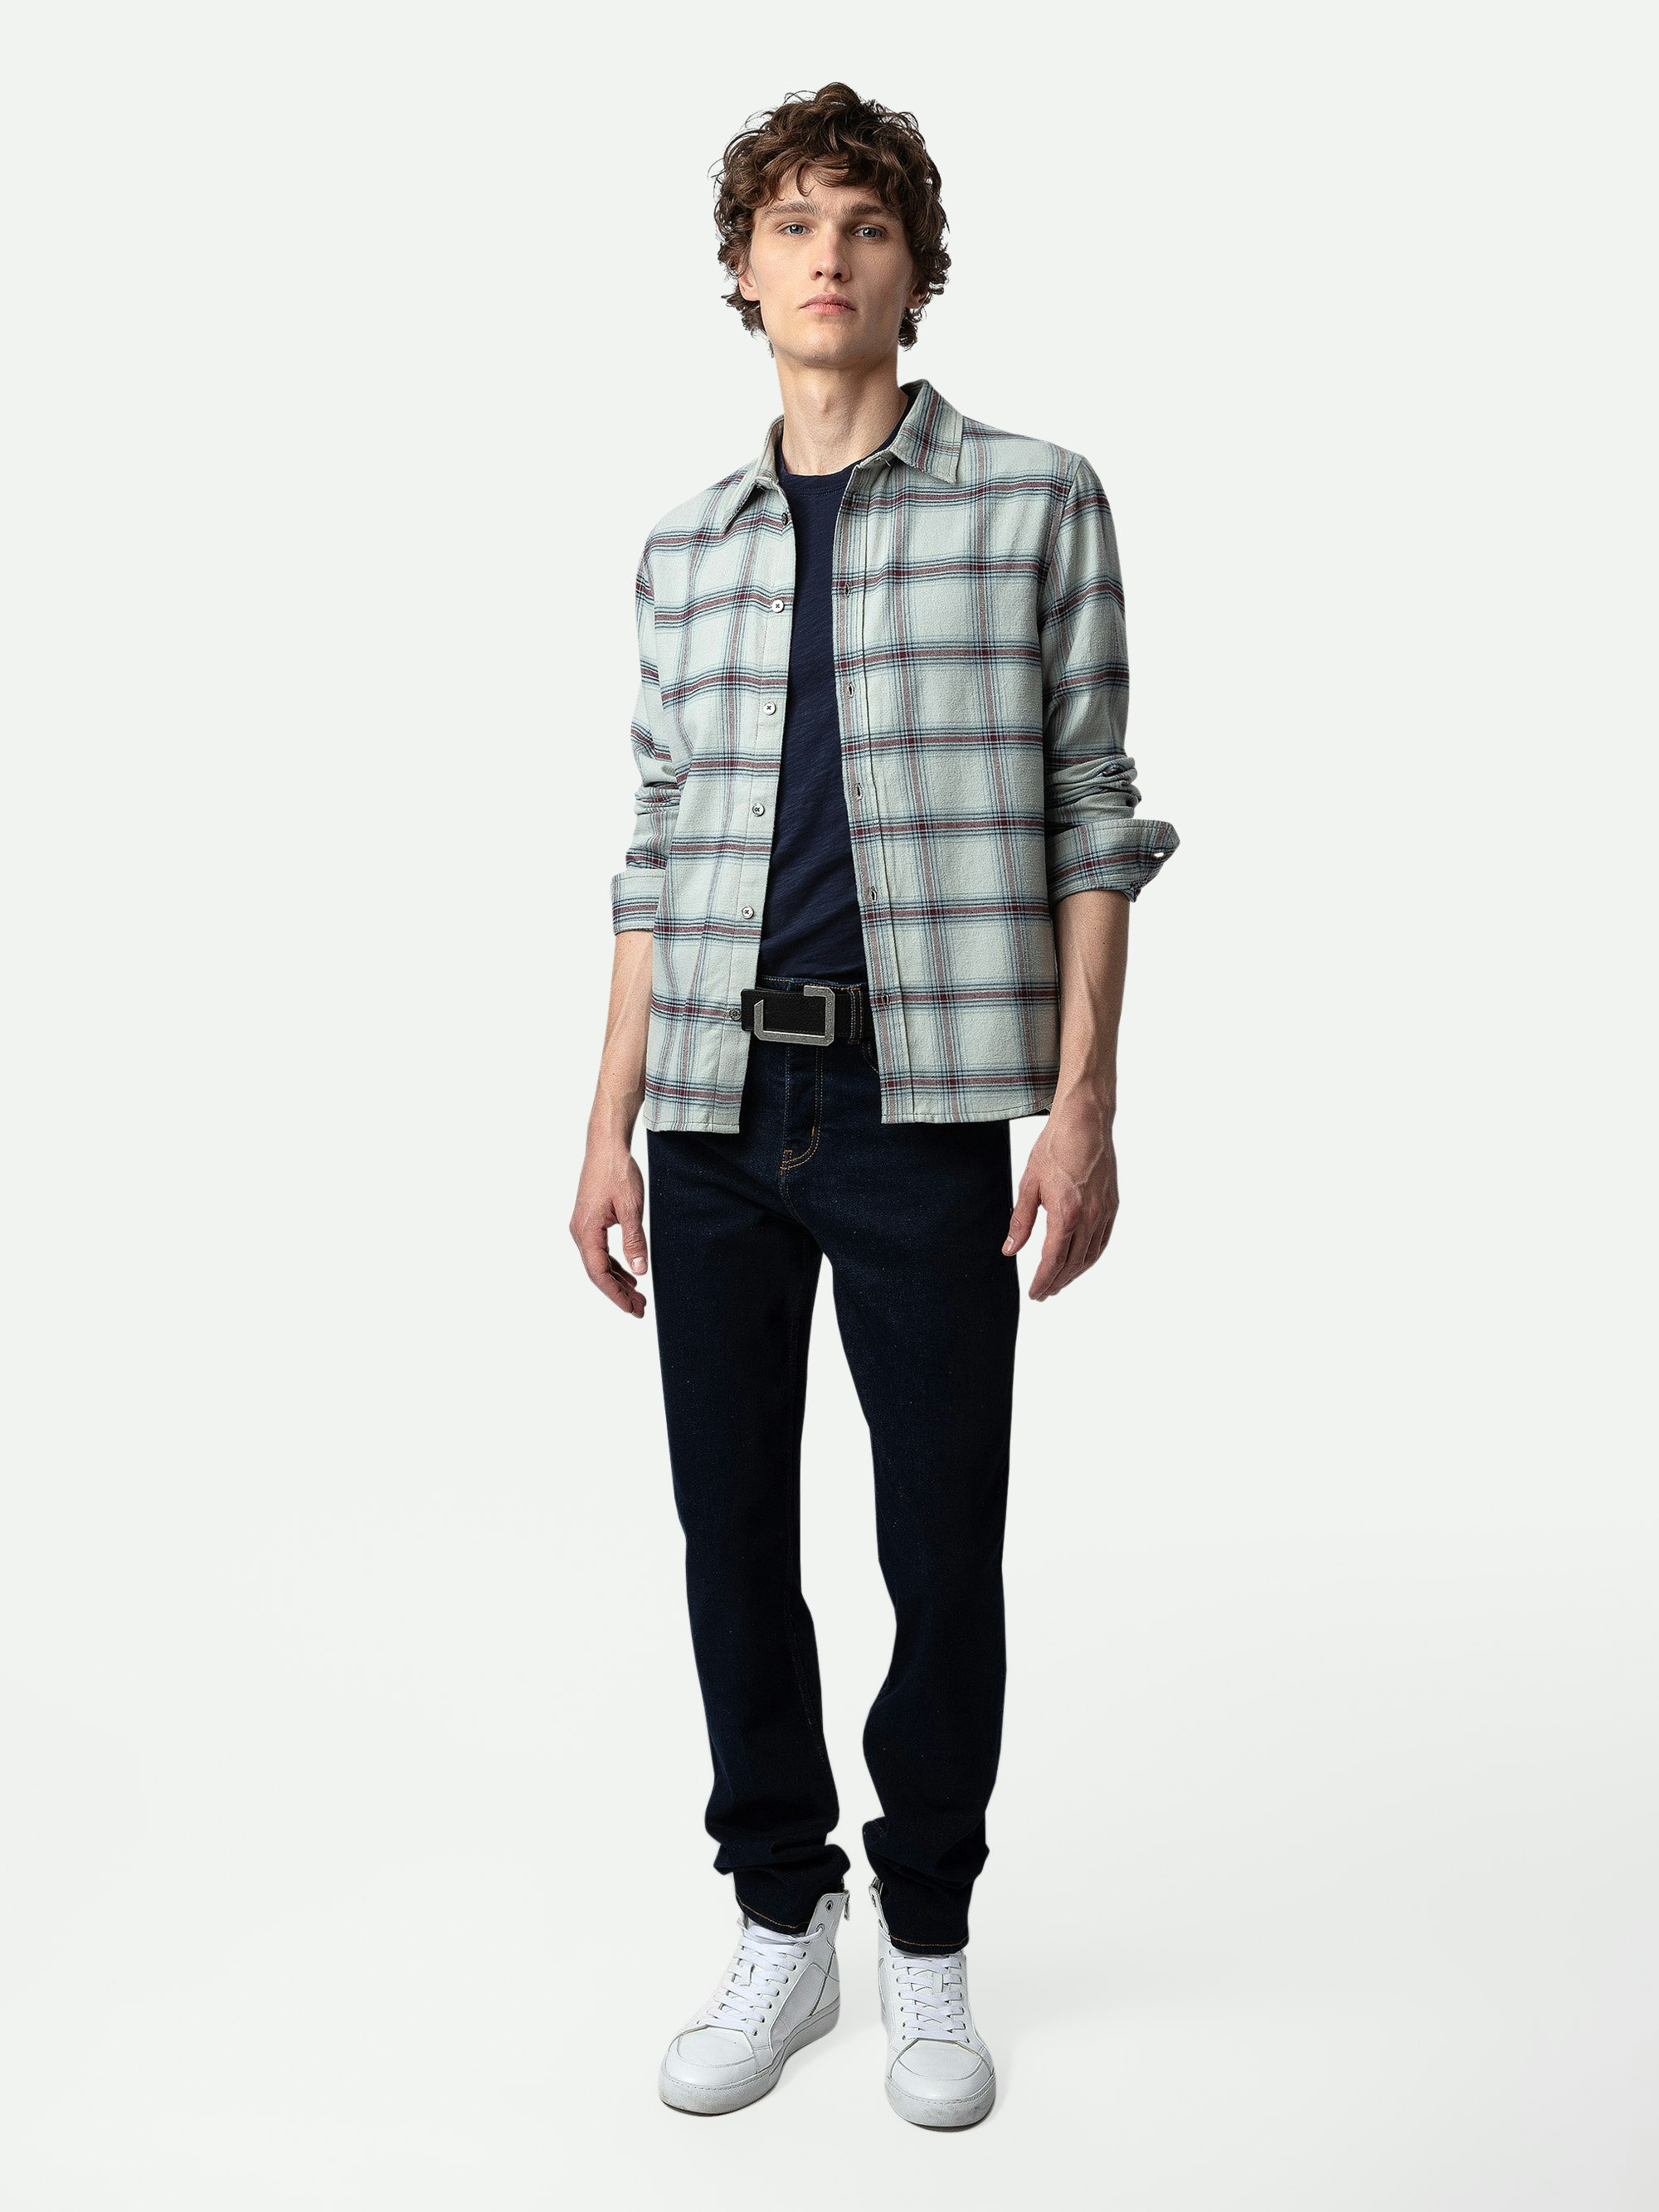 Stan Shirt - Checked grey cotton flannel buttoned shirt with distressed-effect Studio Homme flocking on the back.